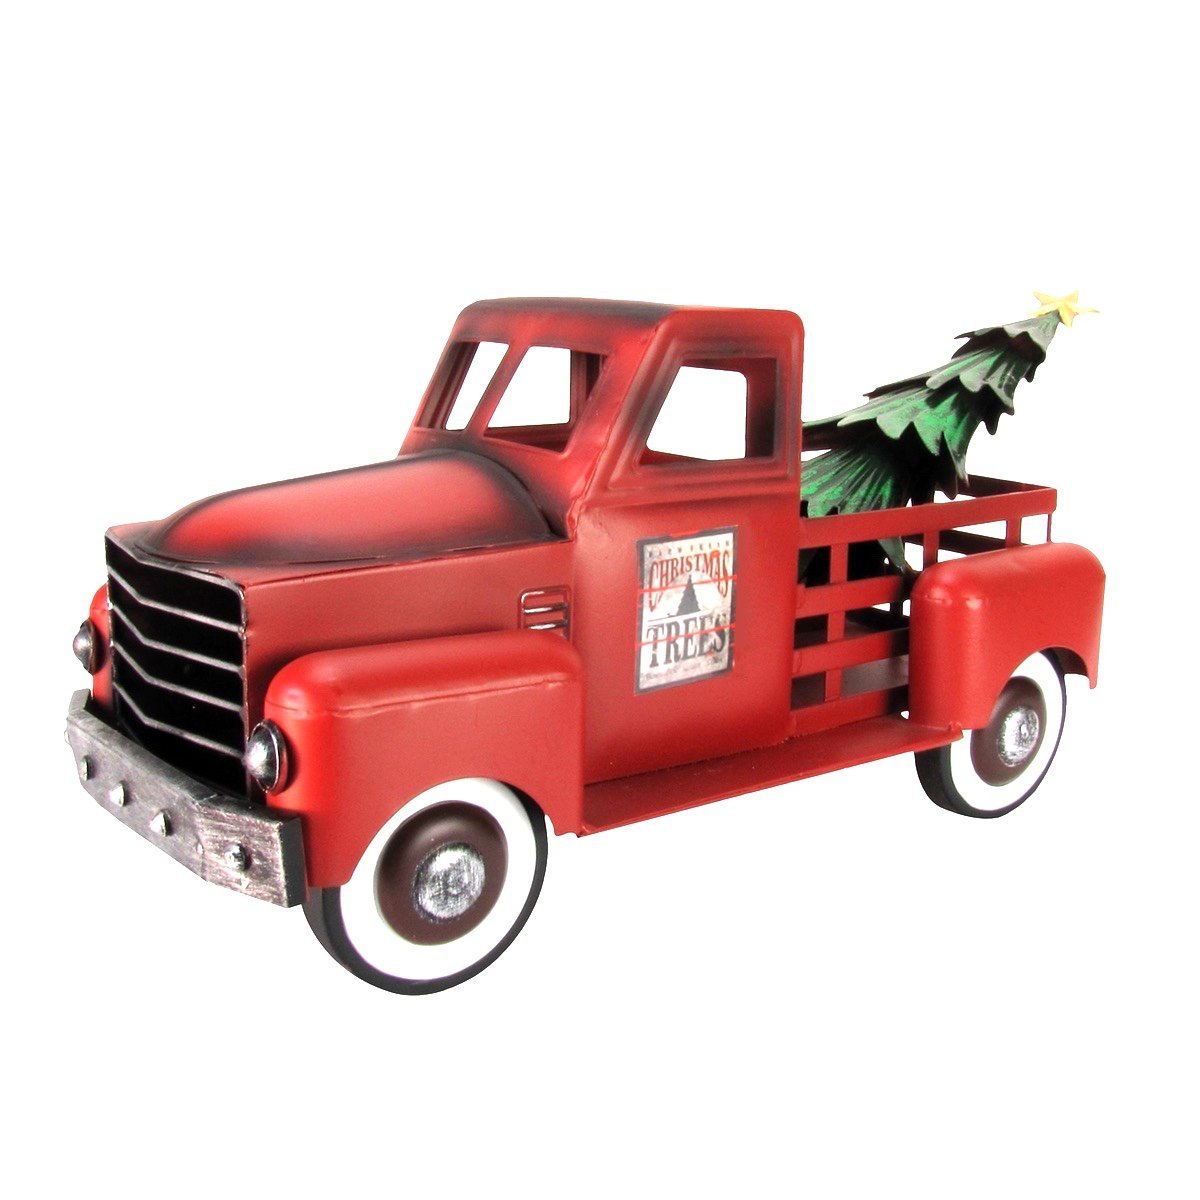 Red Pickup with Christmas Tree